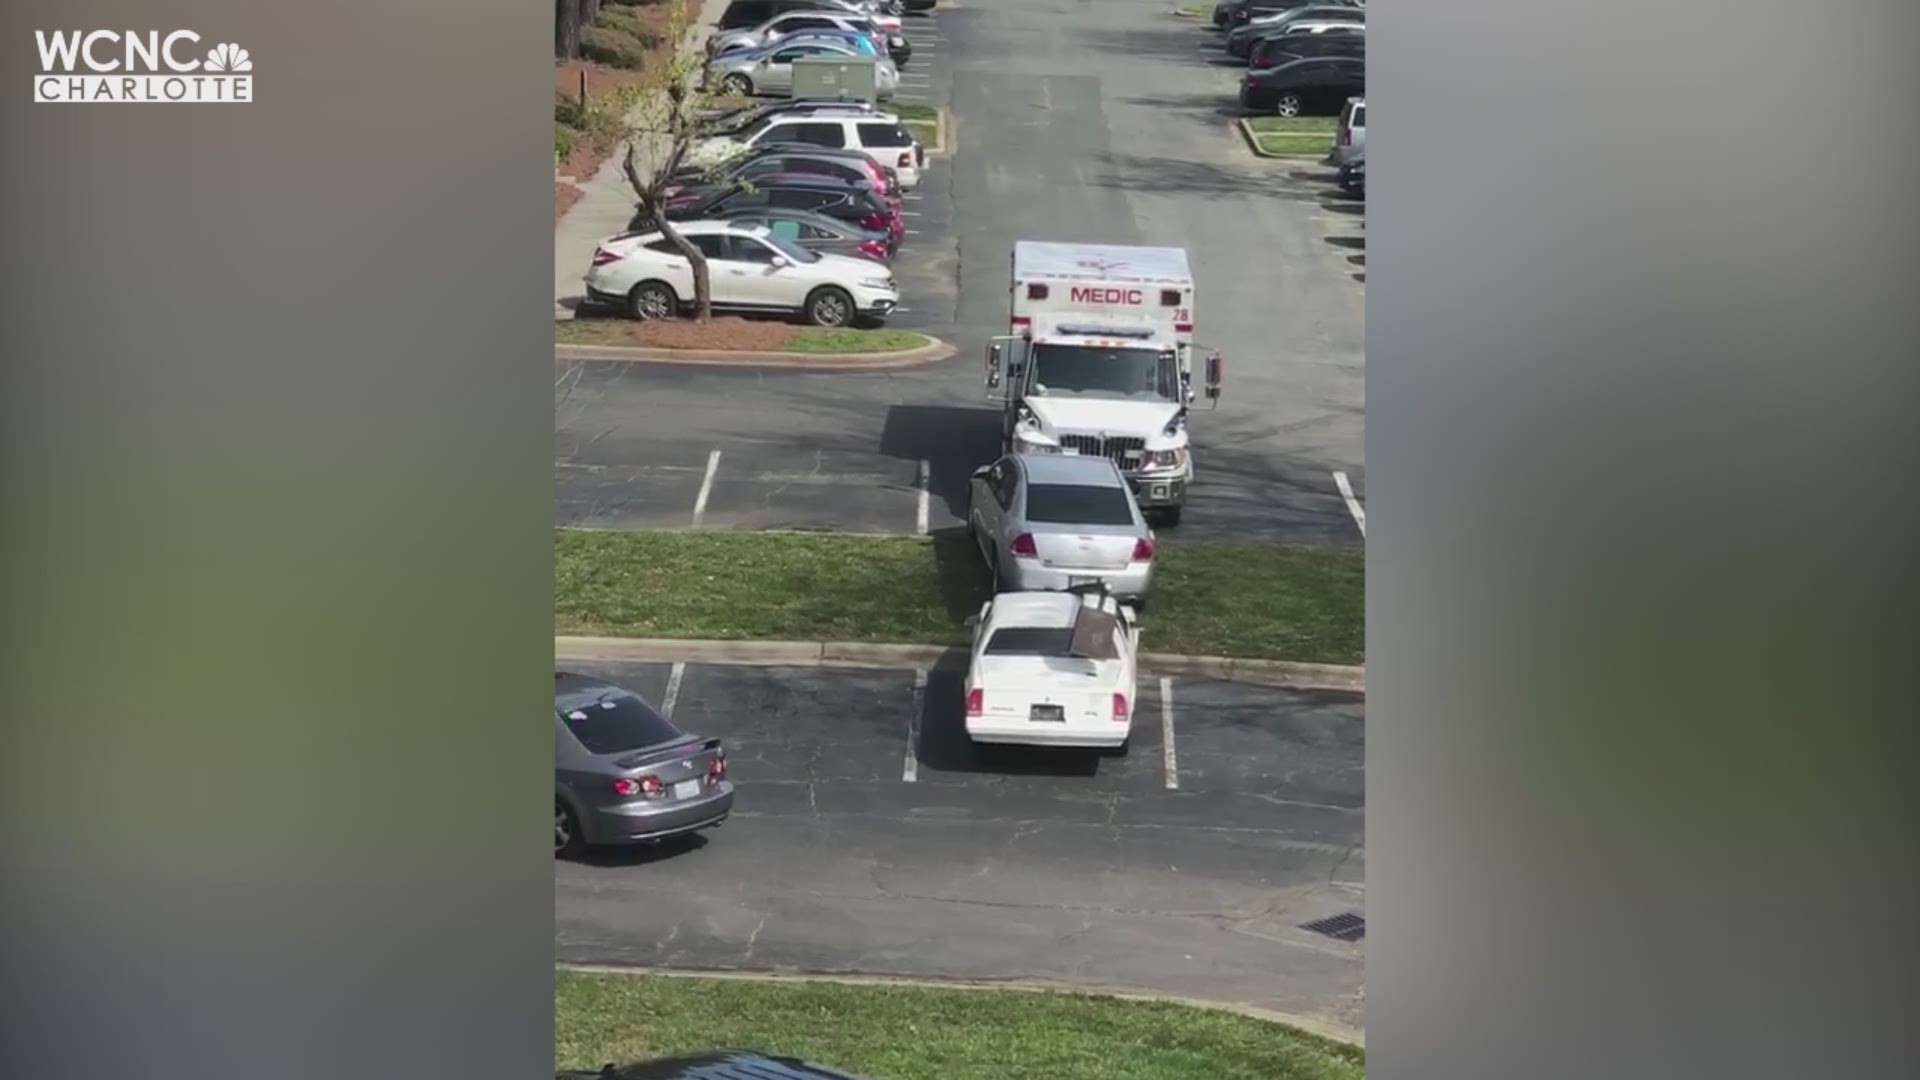 In the video, you can see the ambulance lunge forward and push two cars into other vehicles in a parking lot in east Charlotte.